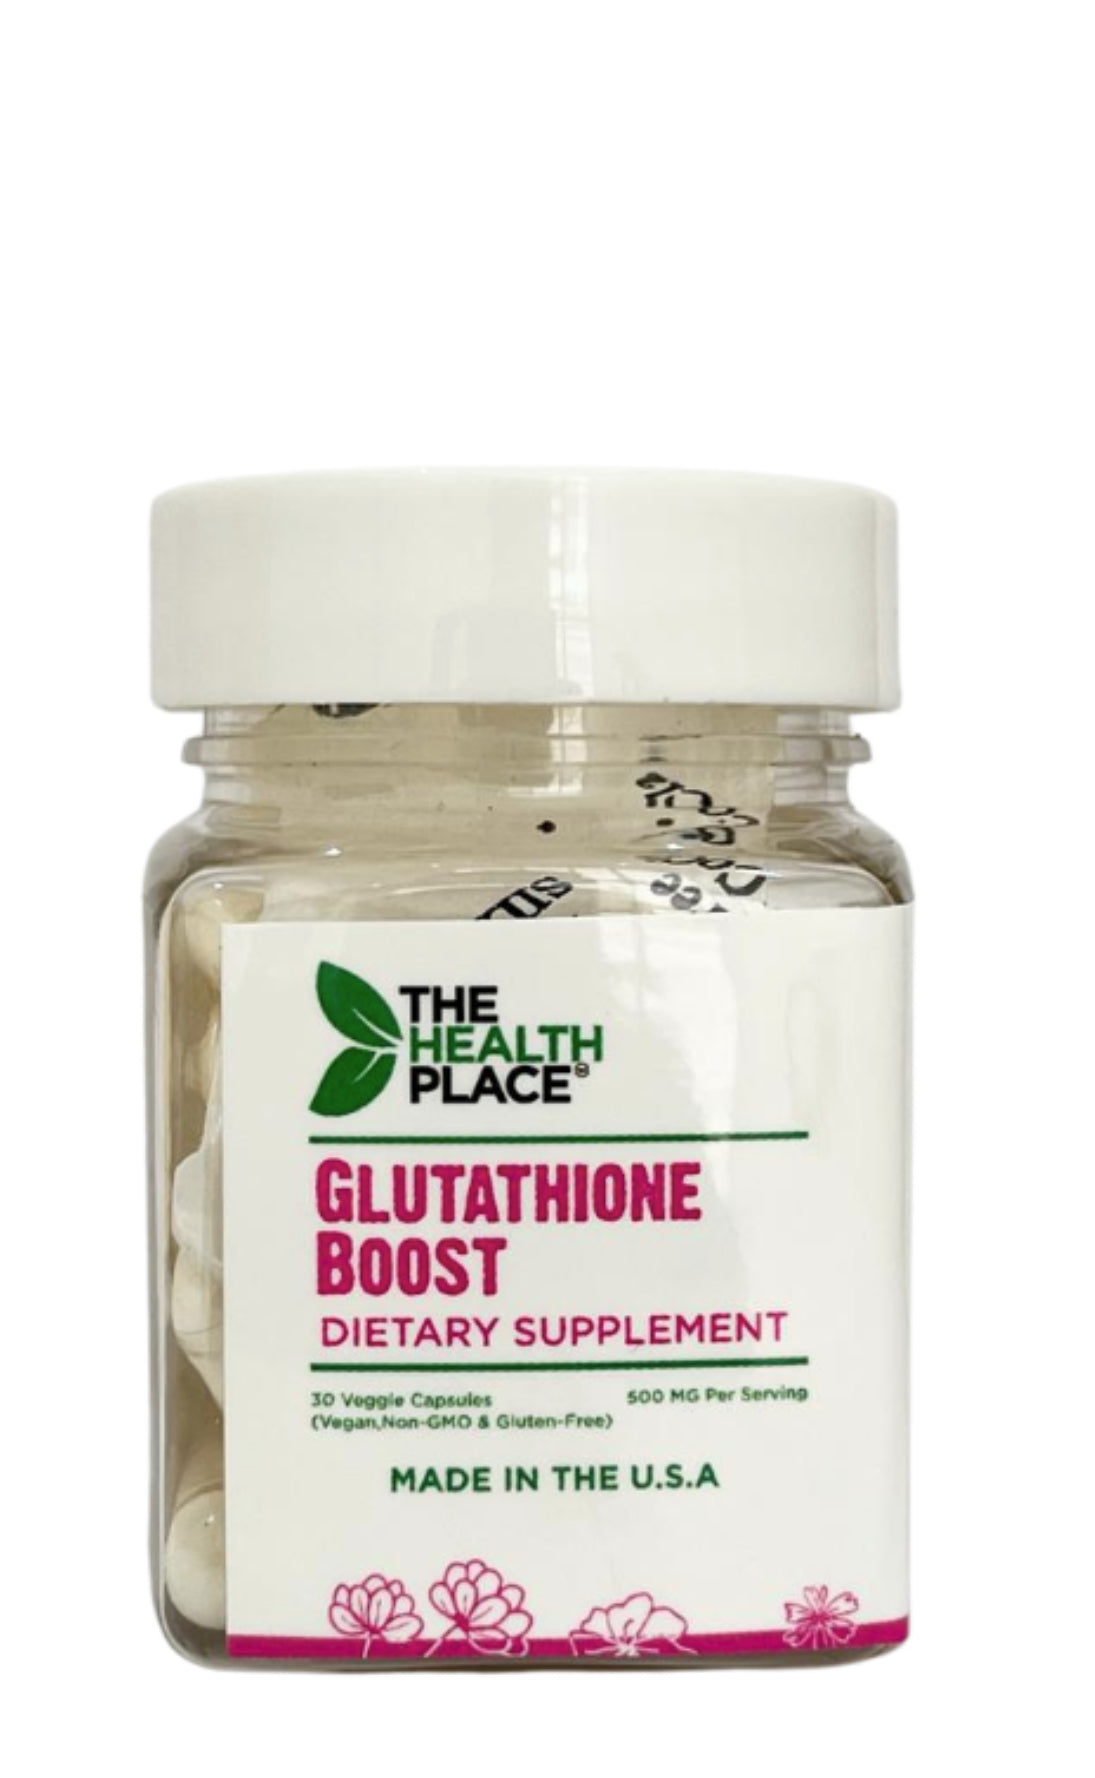 Glutathione Boost - 30 Capsules 650mg each *in Plastic Bottle